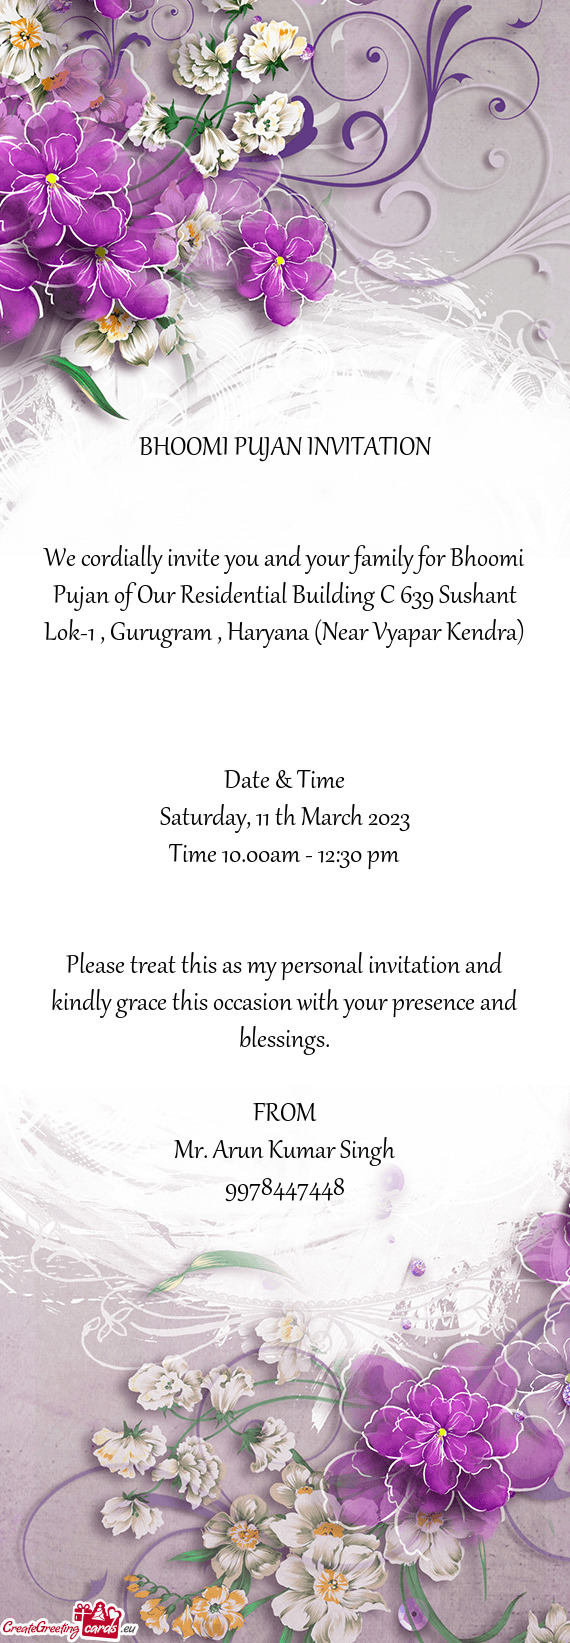 We cordially invite you and your family for Bhoomi Pujan of Our Residential Building C 639 Sushant L